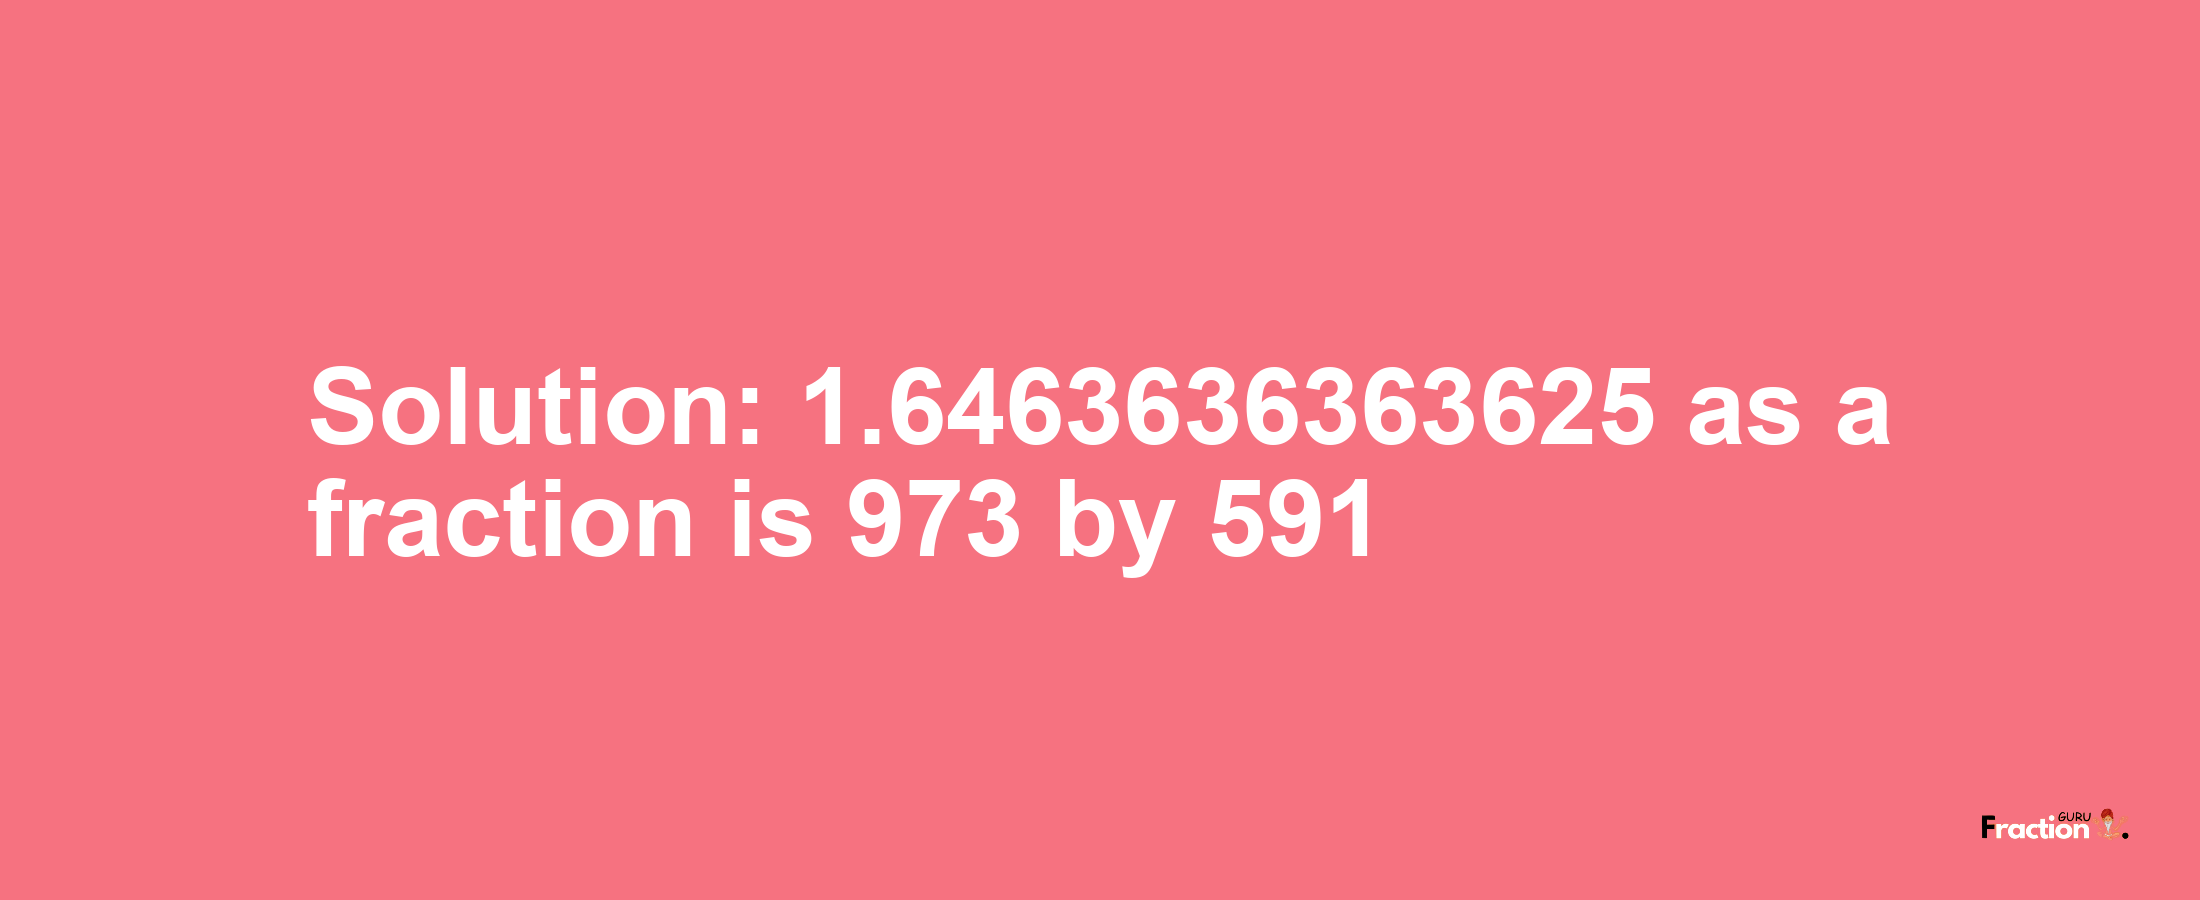 Solution:1.6463636363625 as a fraction is 973/591